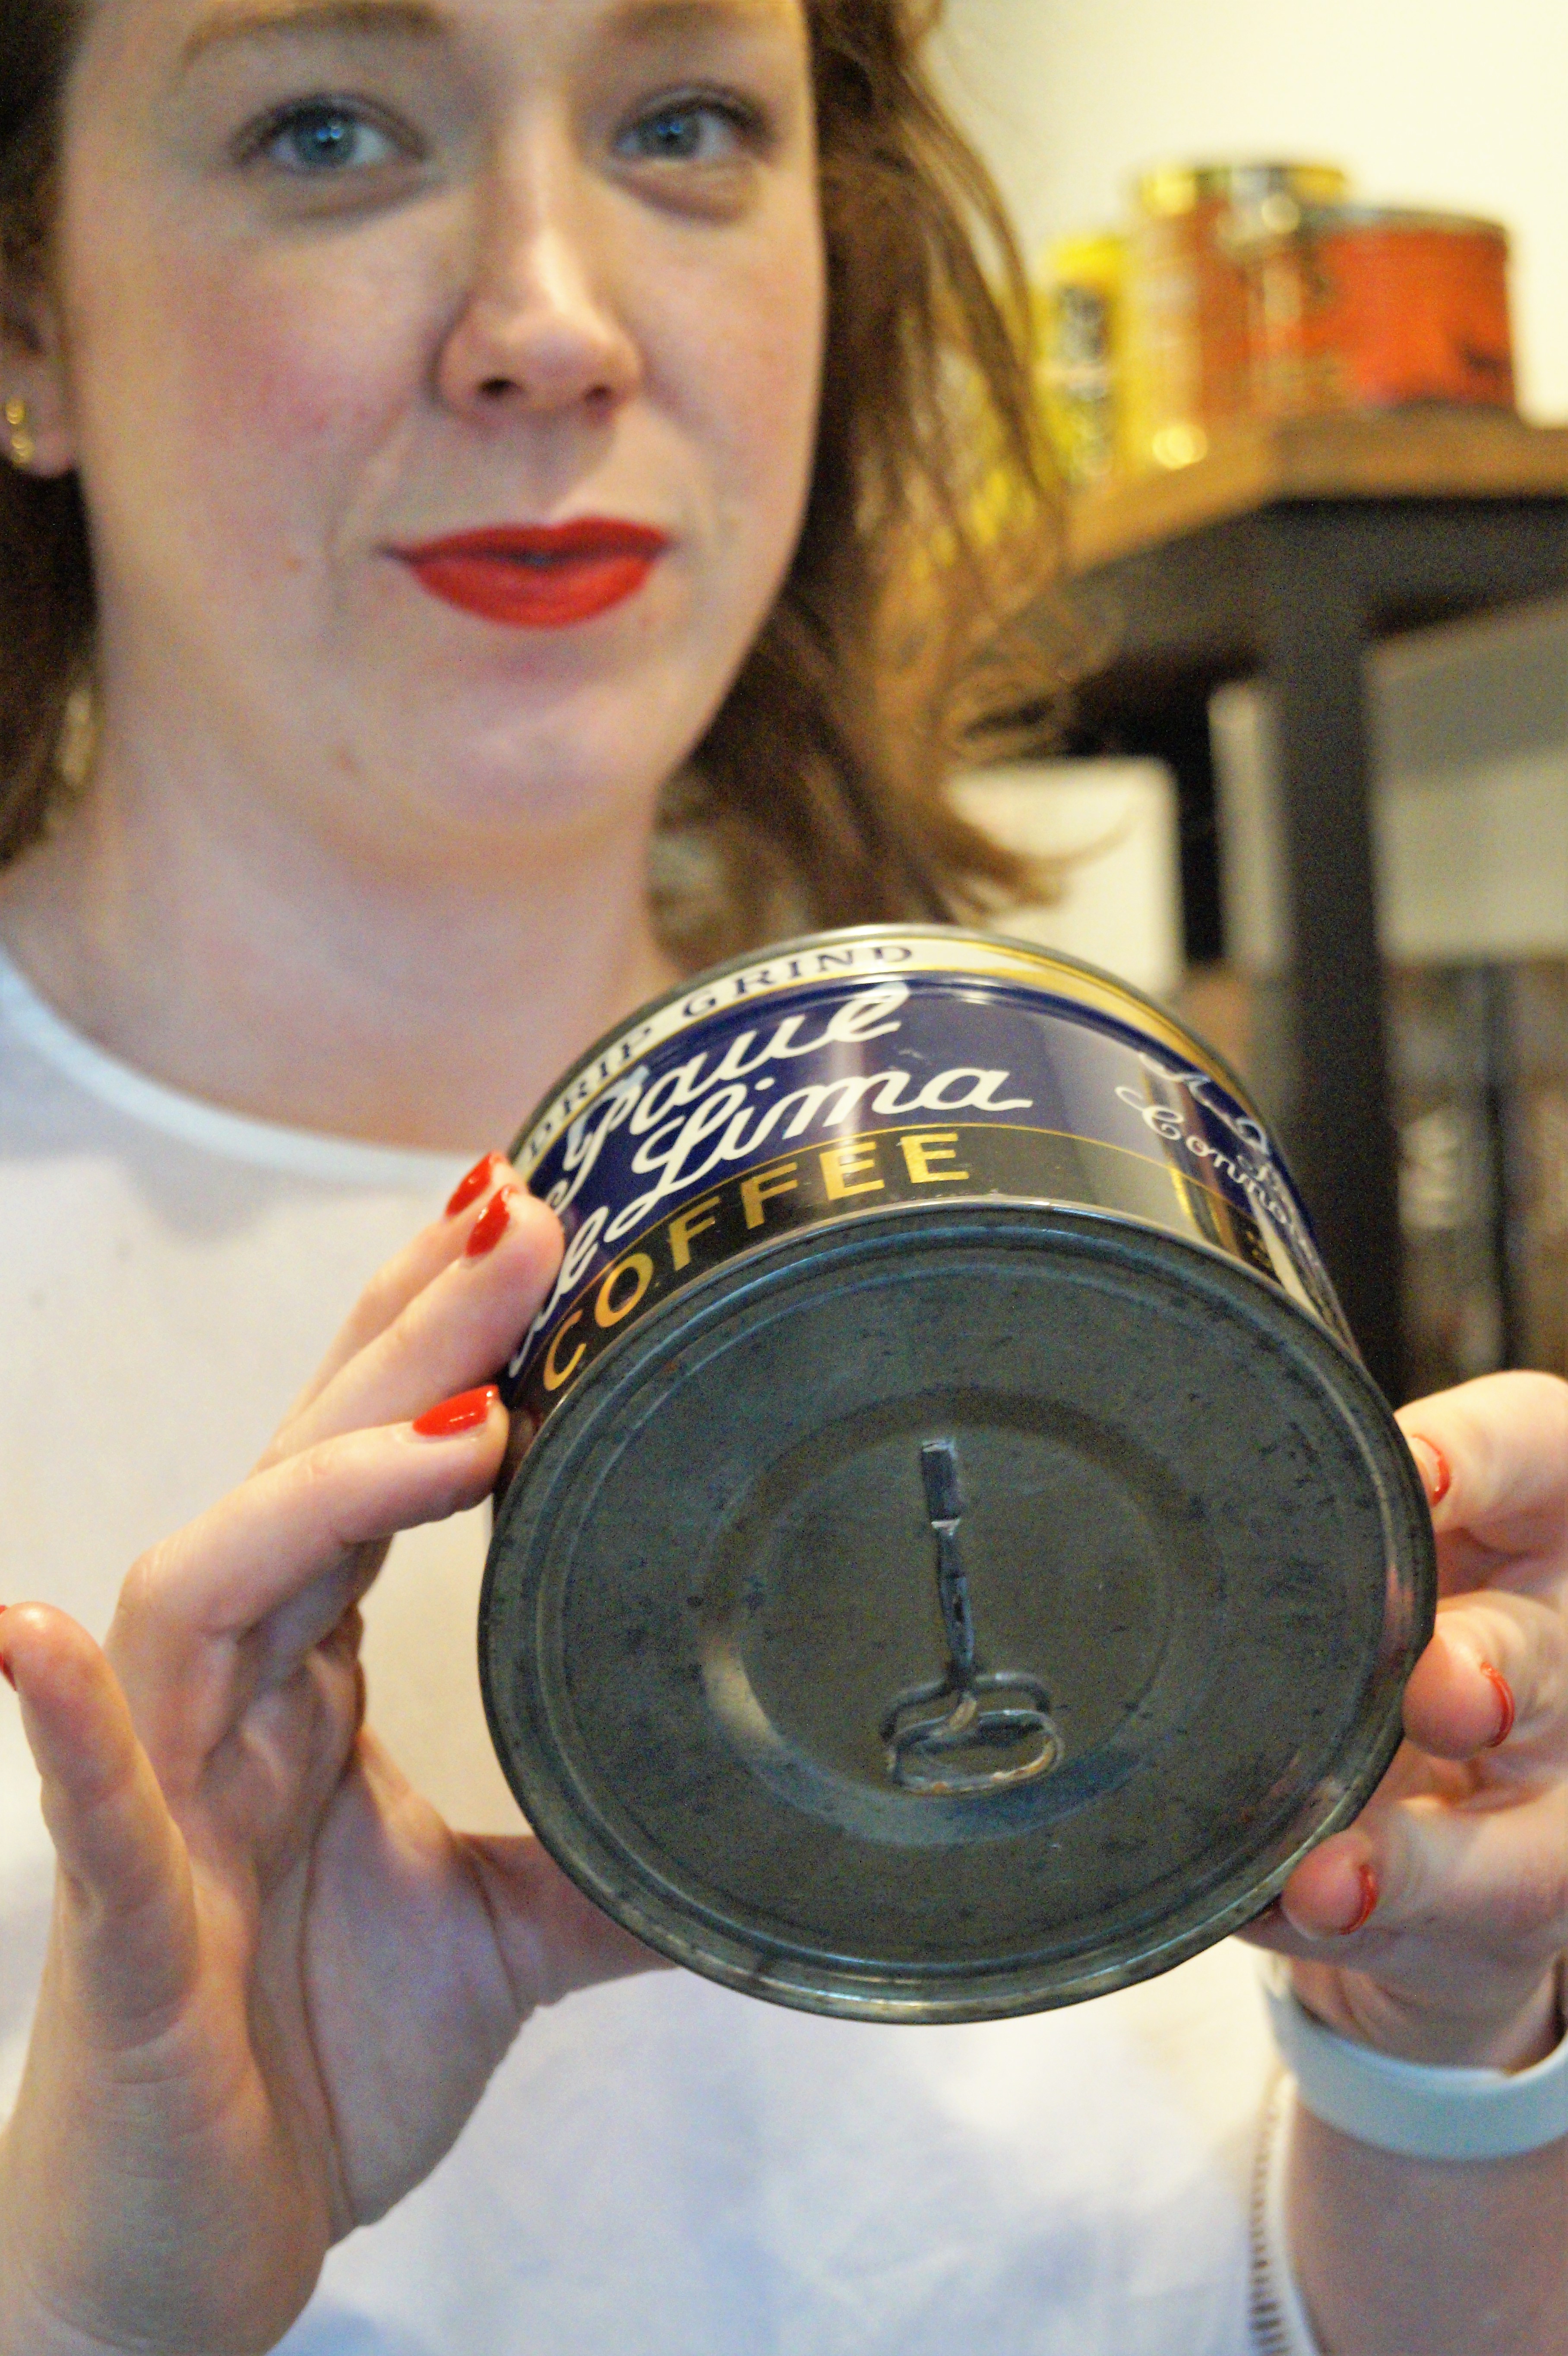 Kate holds the favorite antique coffee can from the collection on display. The can still has its key attached and is full of coffee.